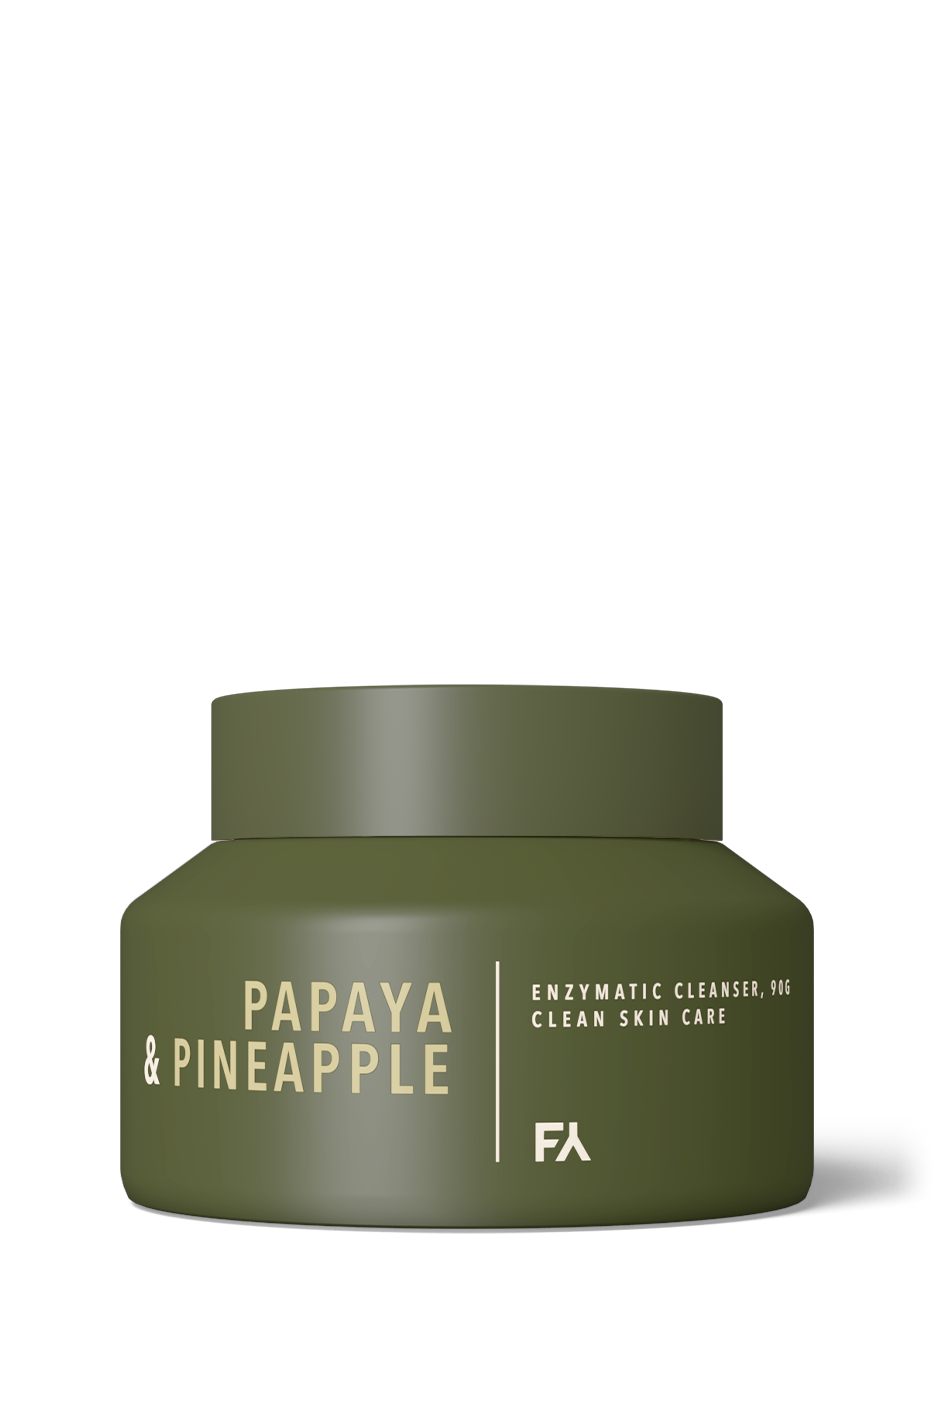 Product image of the Papaya & Pineapple Enzymatic Cleanser by Fields of Yarrow with a transparent background